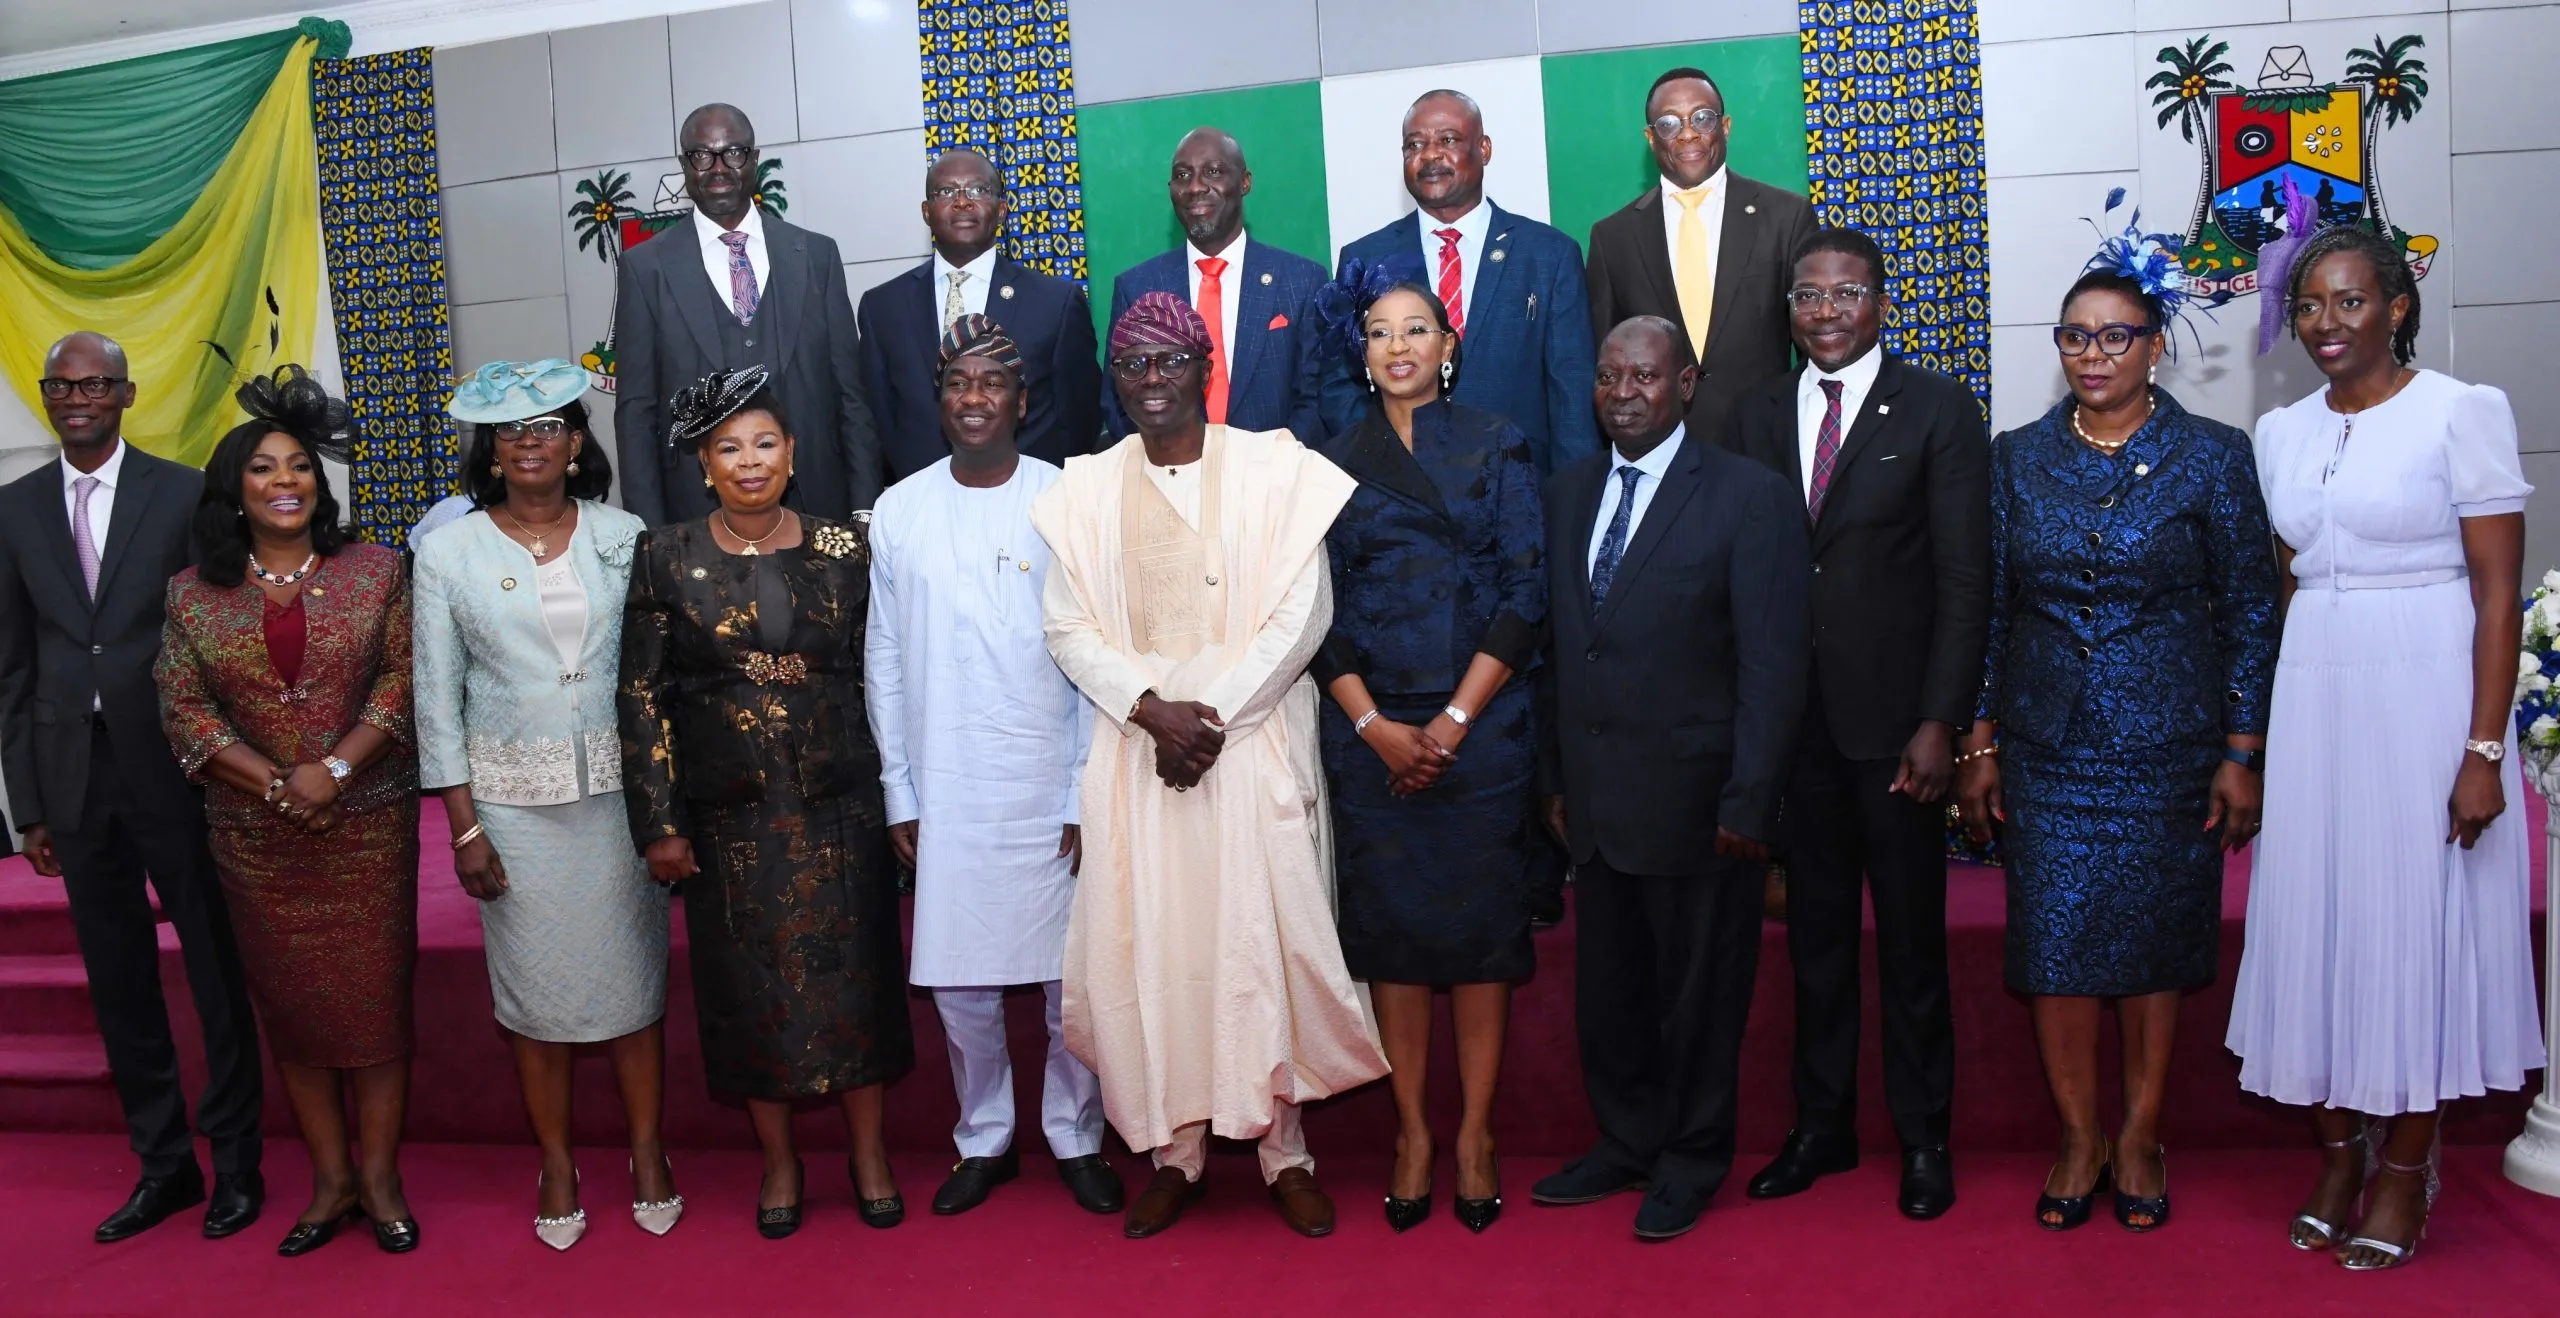 Lagosians Must Get Best Of Public Service At All Times, Sanwo-Olu Tells Newly Appointed Perm Secs